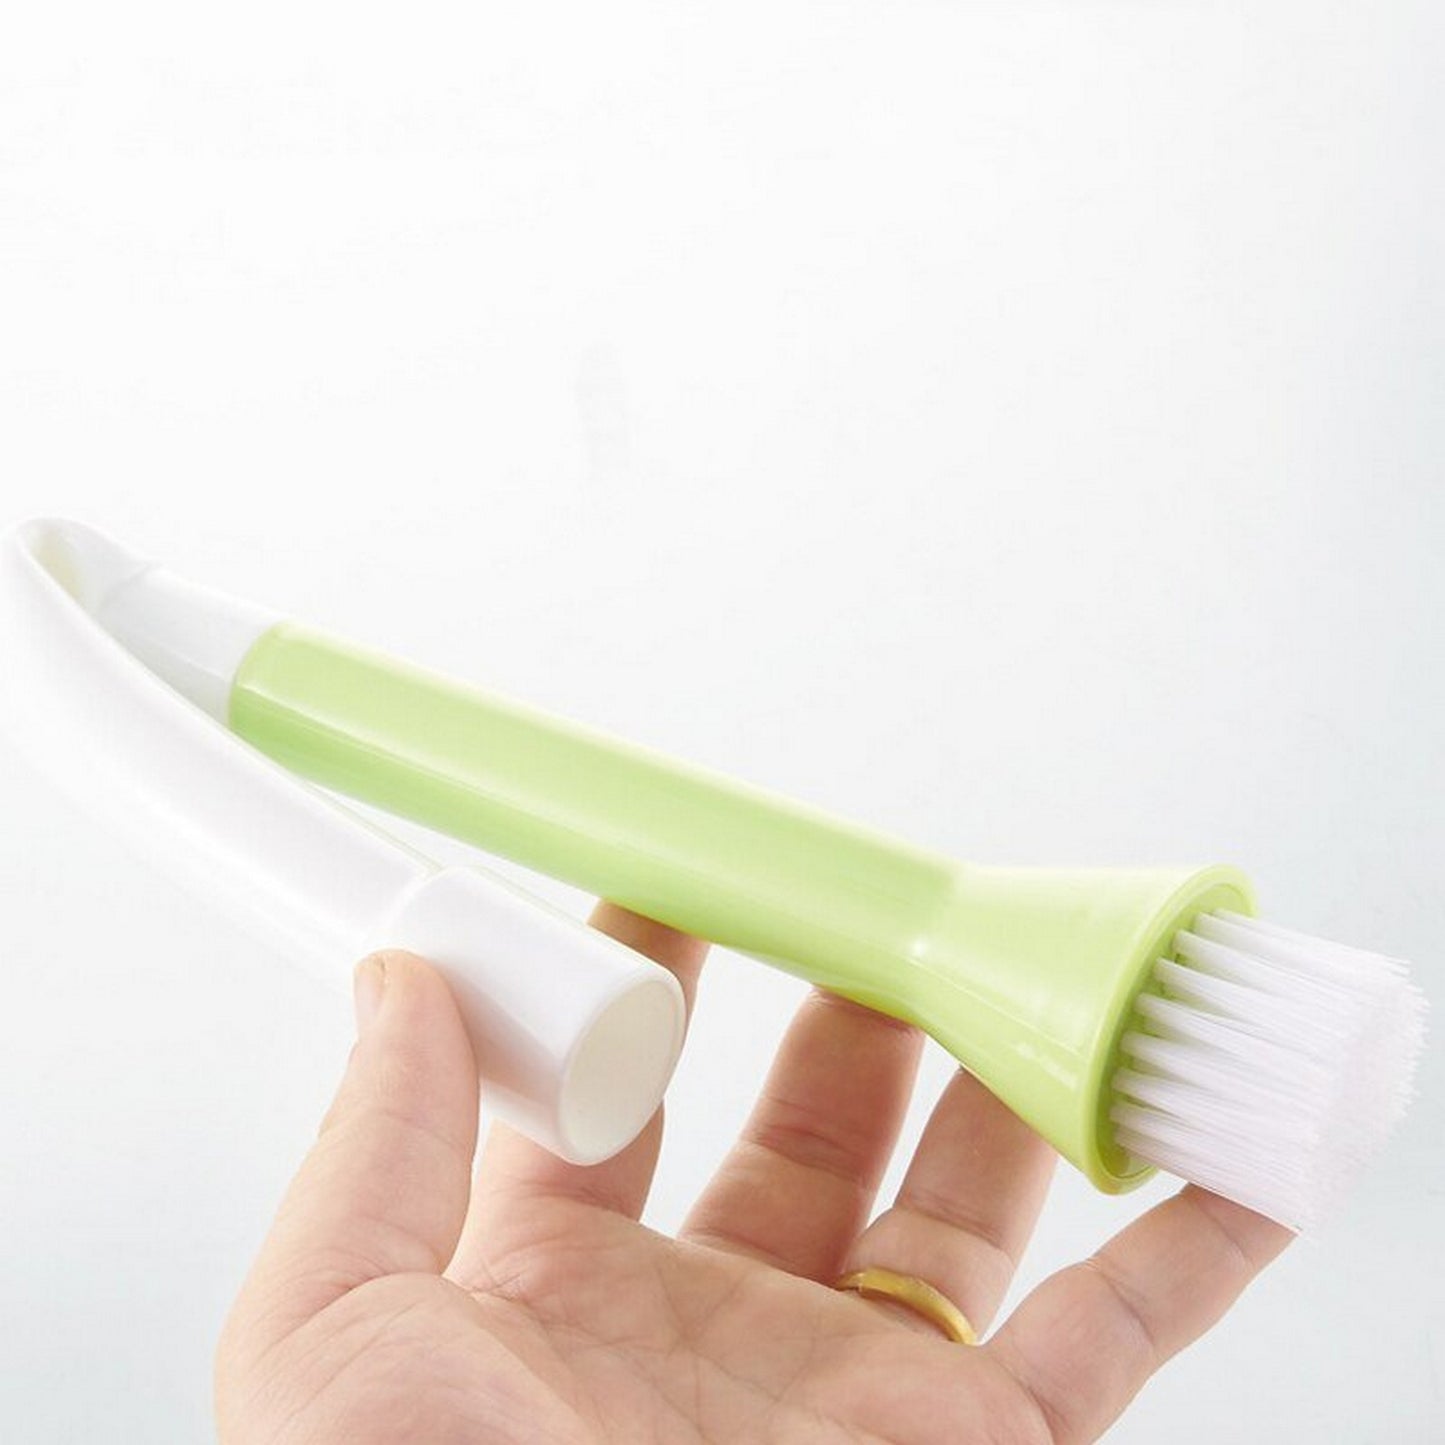 Water Bendable Faucet Cleaning Brush For Kitchen Sink - FlyingCart.pk